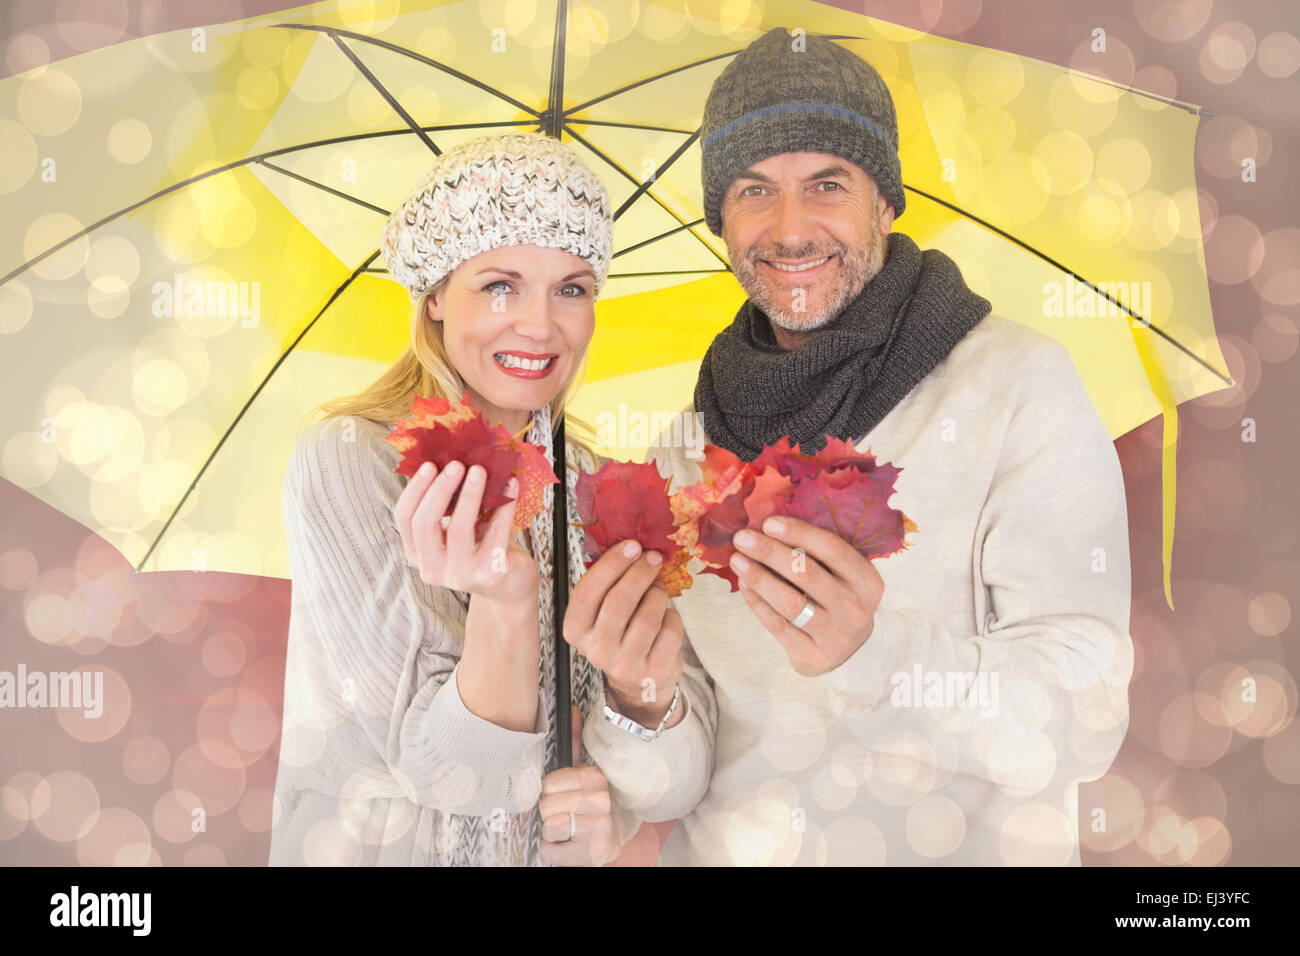 Composite image of couple in winter fashion showing autumn leaves under umbrella Stock Photo